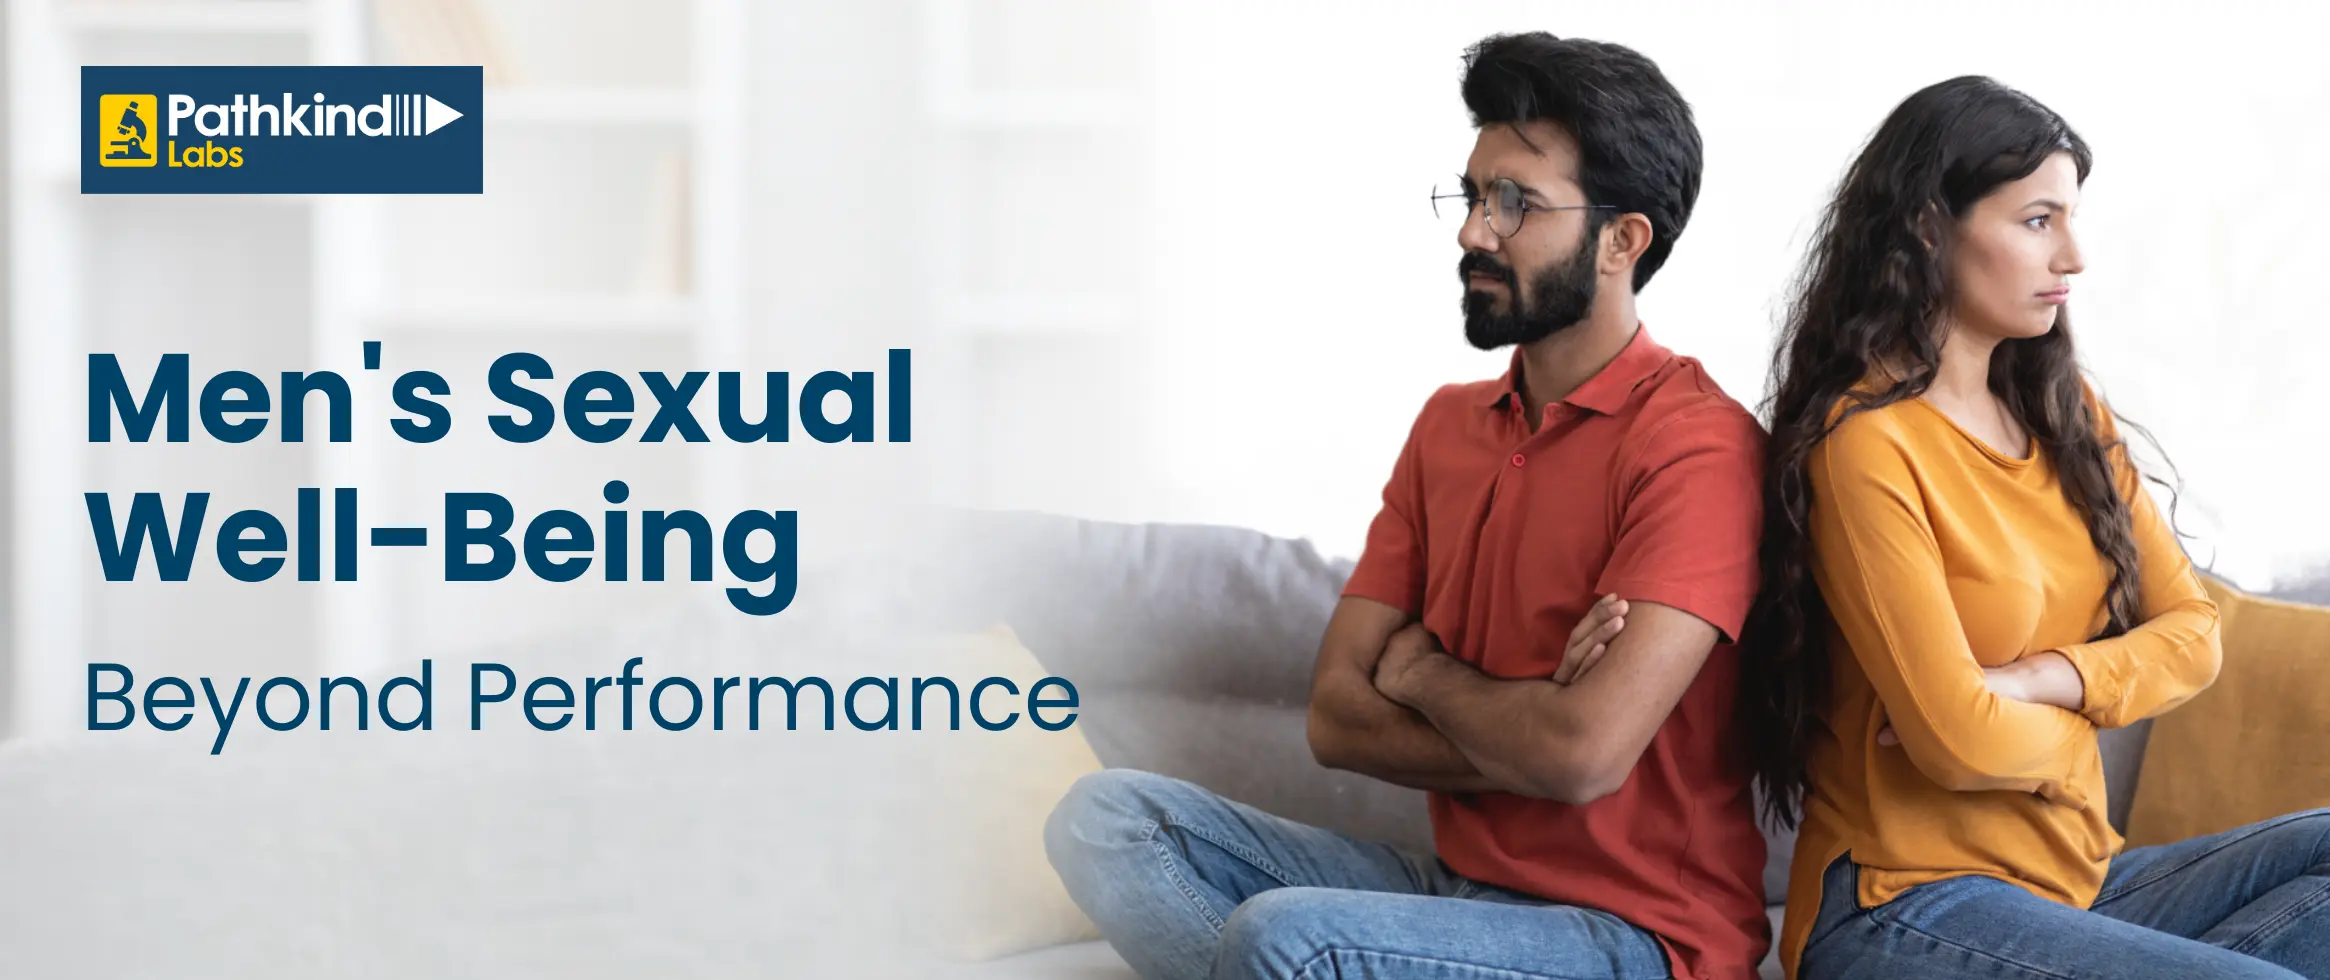 Men’s Sexual Well-Being Beyond Performance